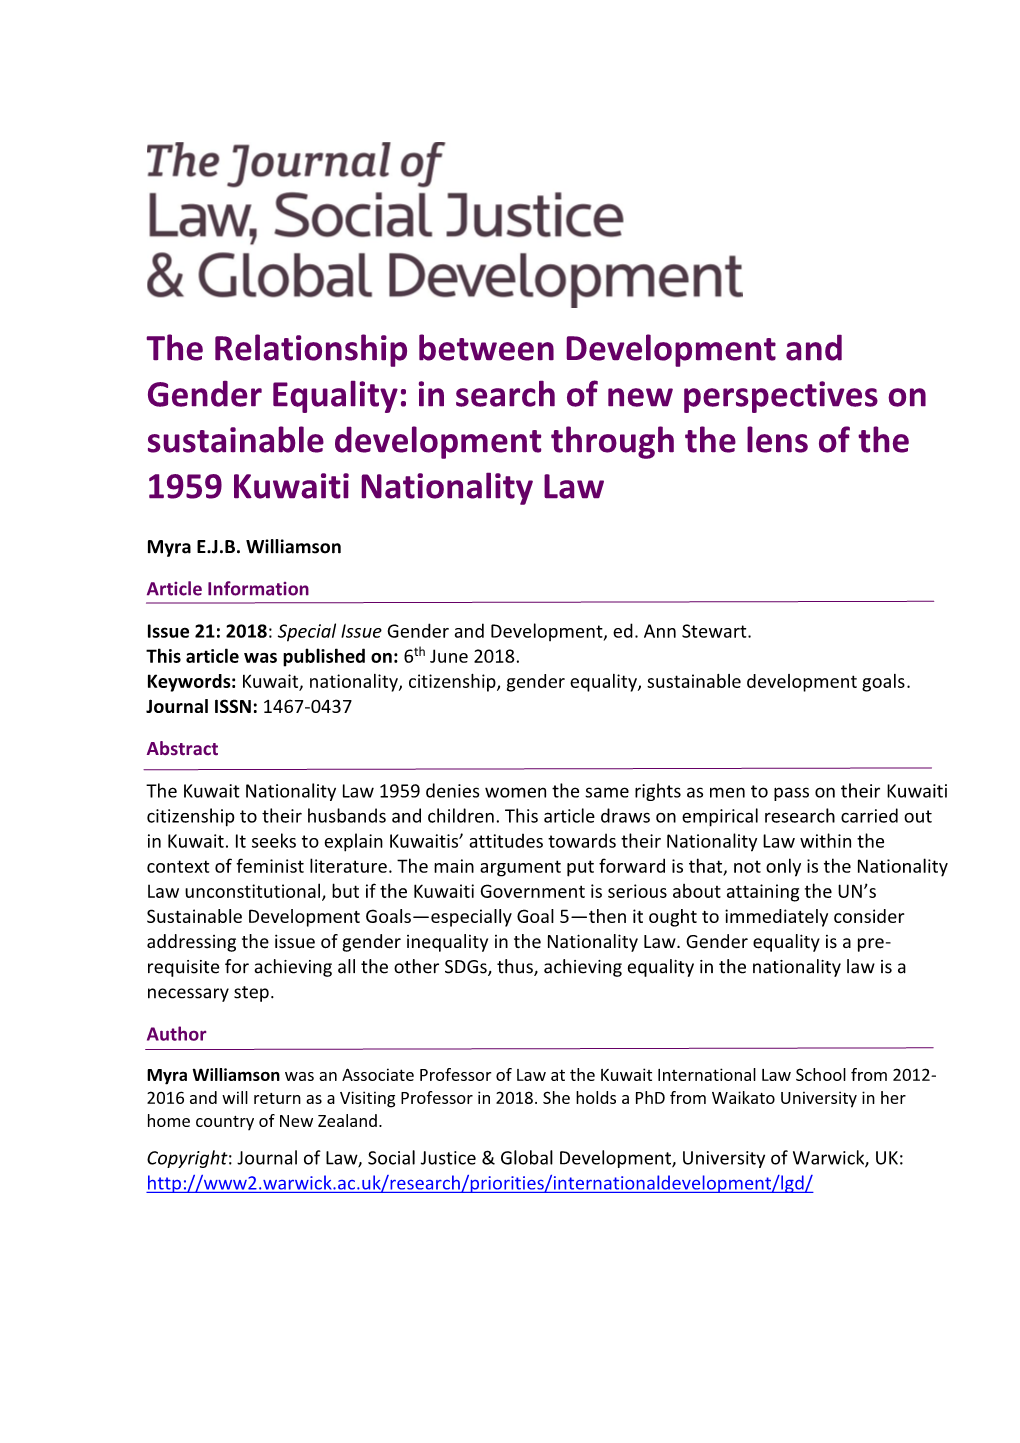 The Relationship Between Development and Gender Equality